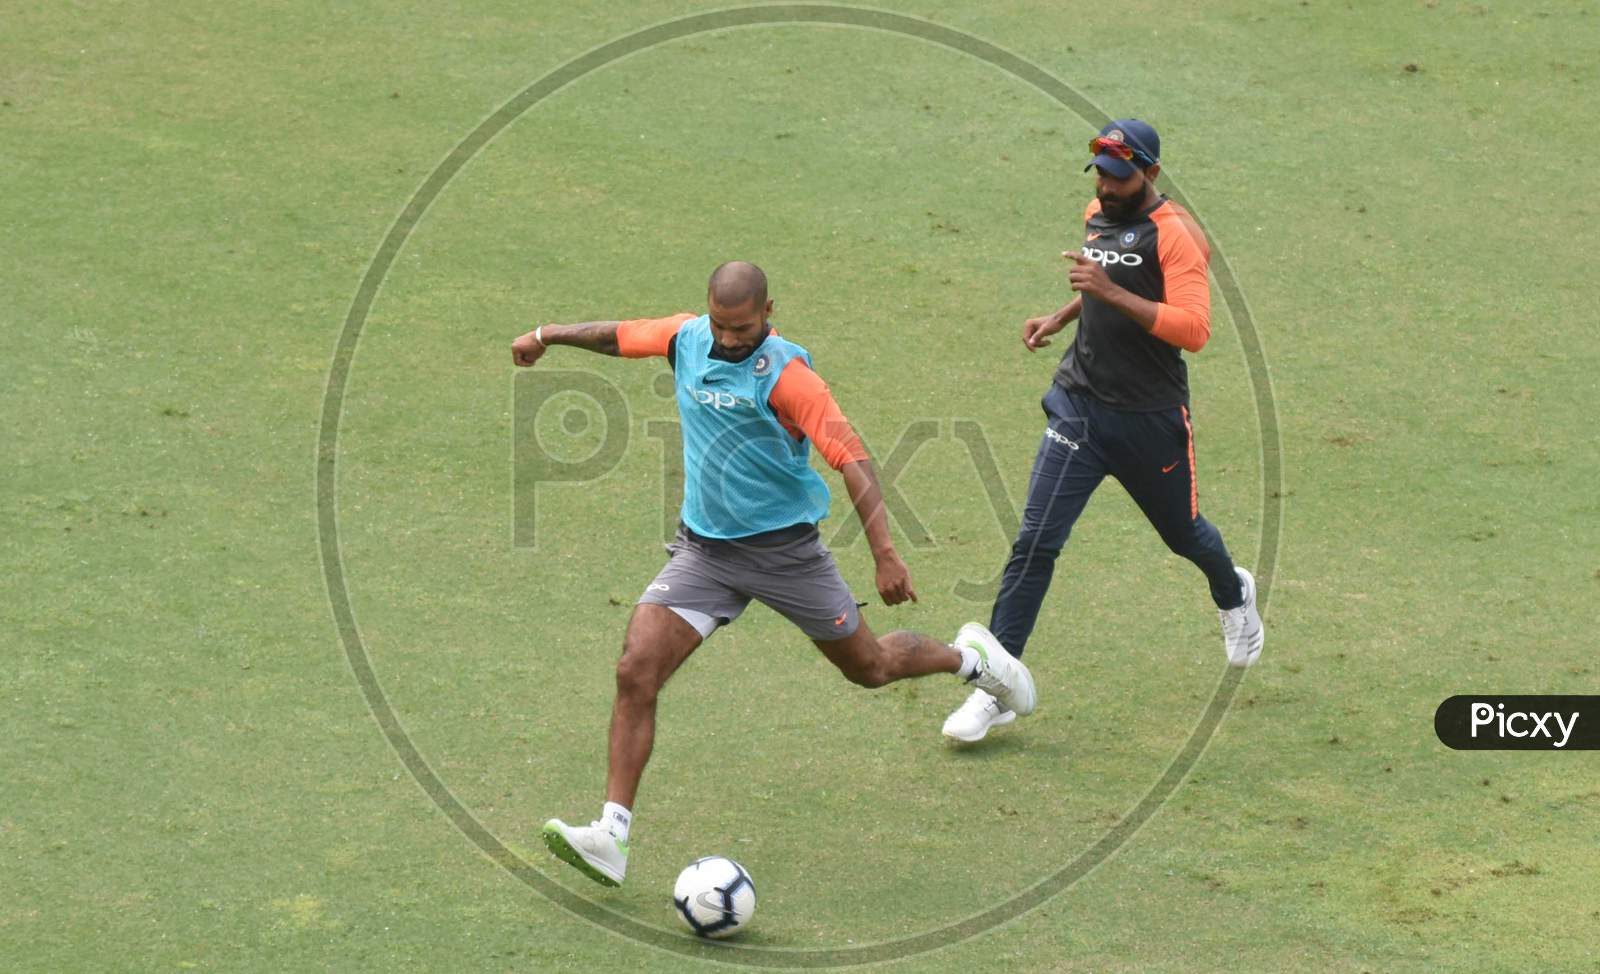 Team India Players  Plays Football During A Practice Session Ahead Of The First One Day International Cricket Match Against West Indies, At Aca Cricket Stadium, Barsapara In Guwahati